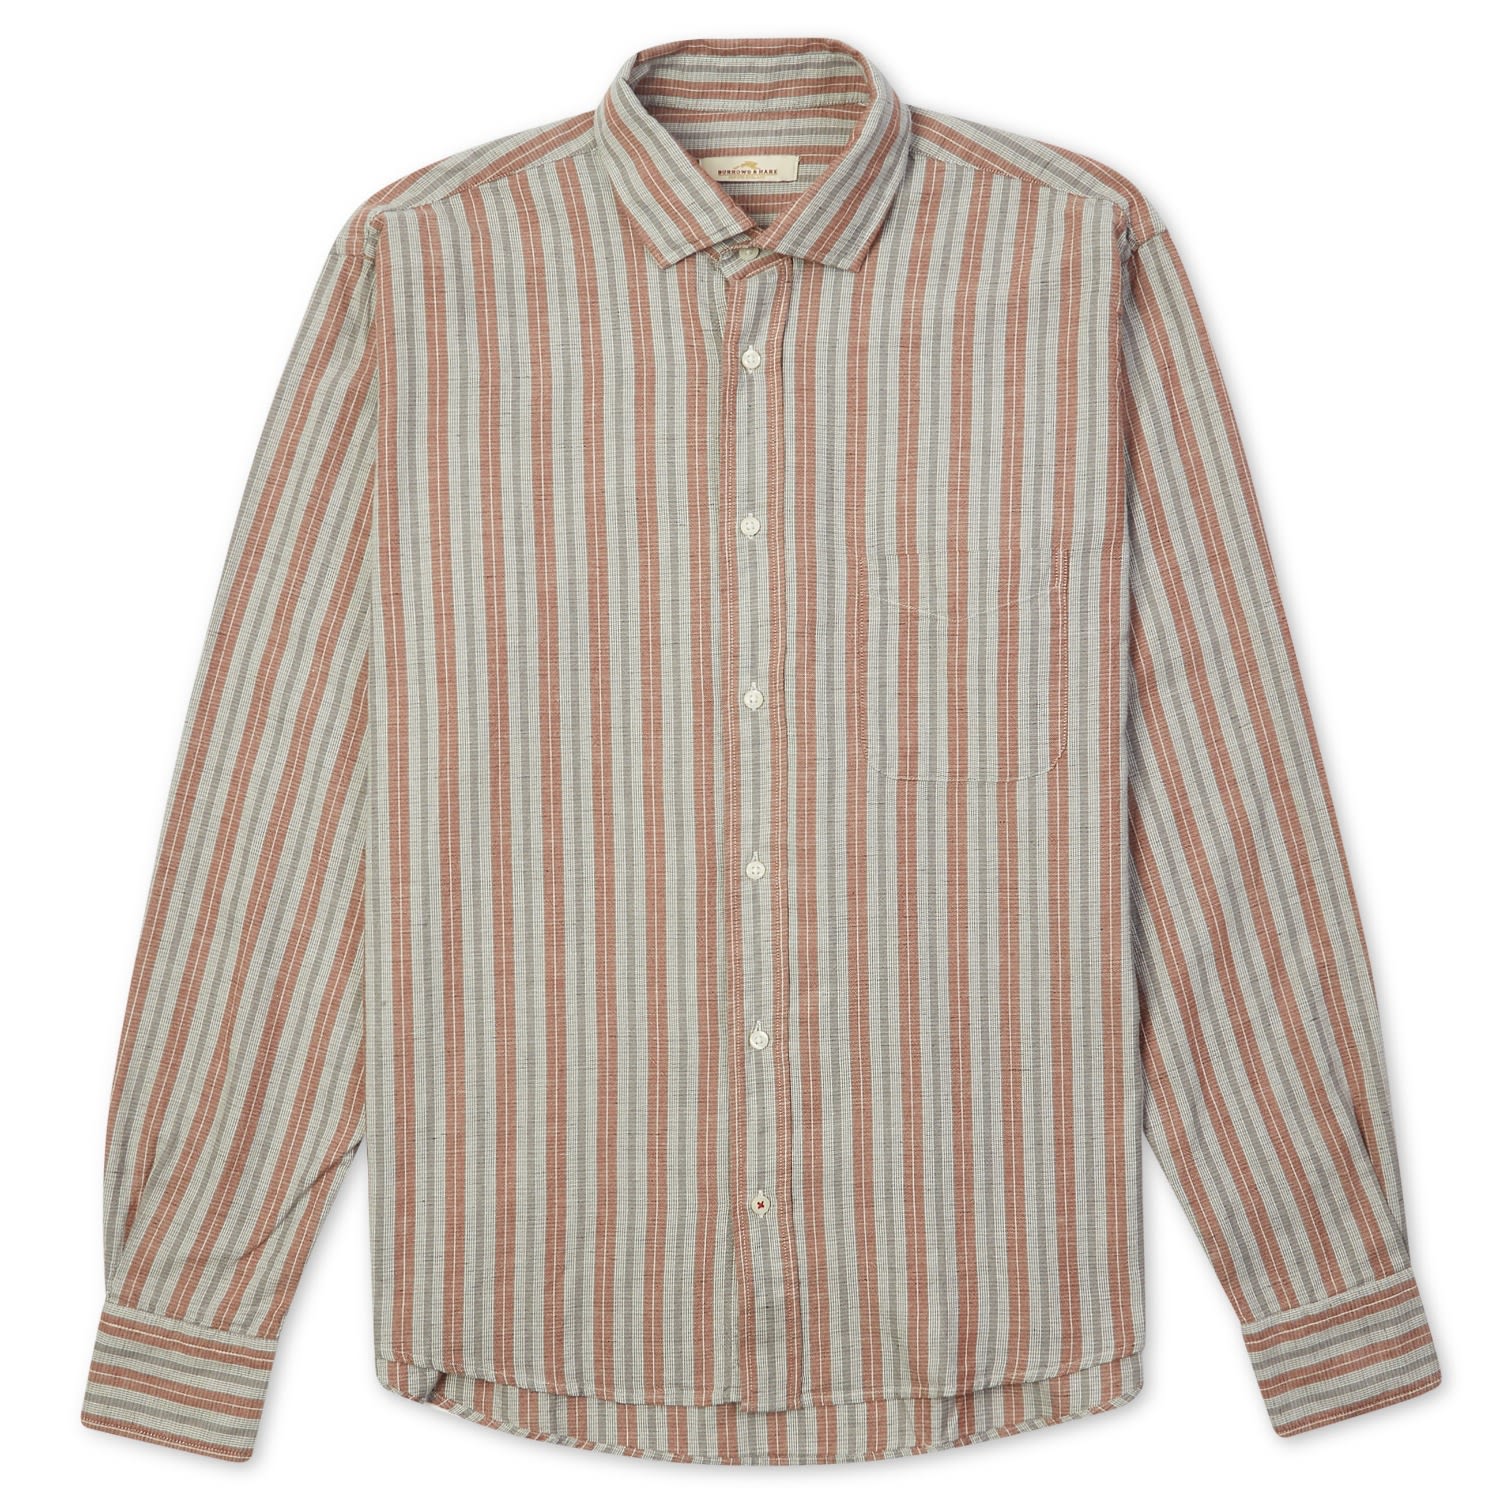 Burrows And Hare Men's Ticking Shirt - Neutrals